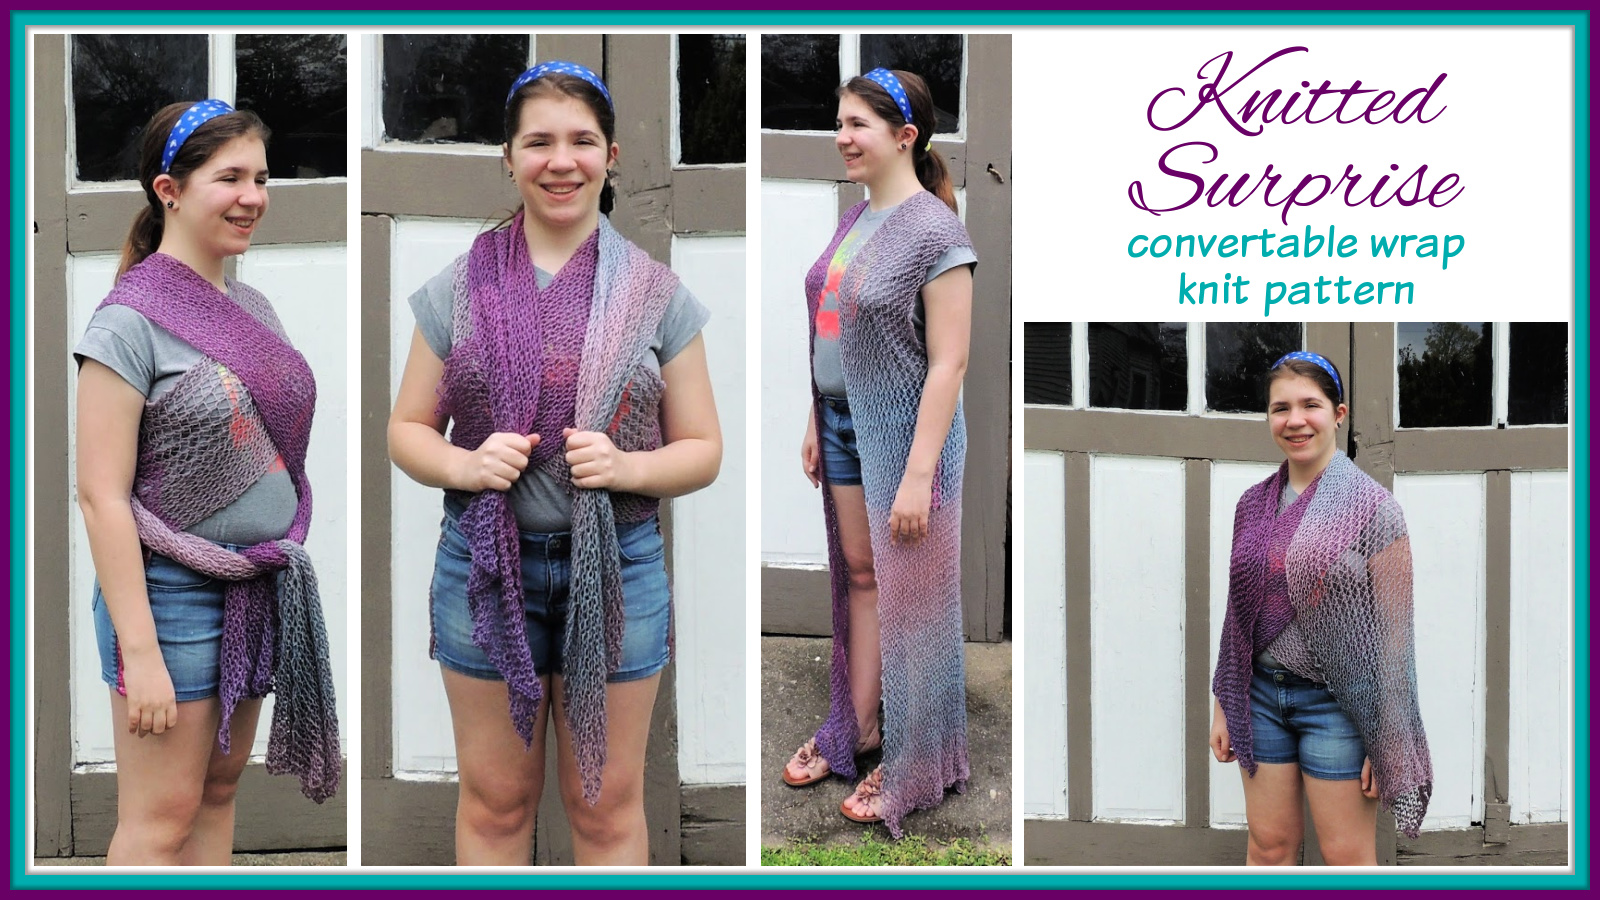 Knitted Surprise – convertible wrap knit pattern